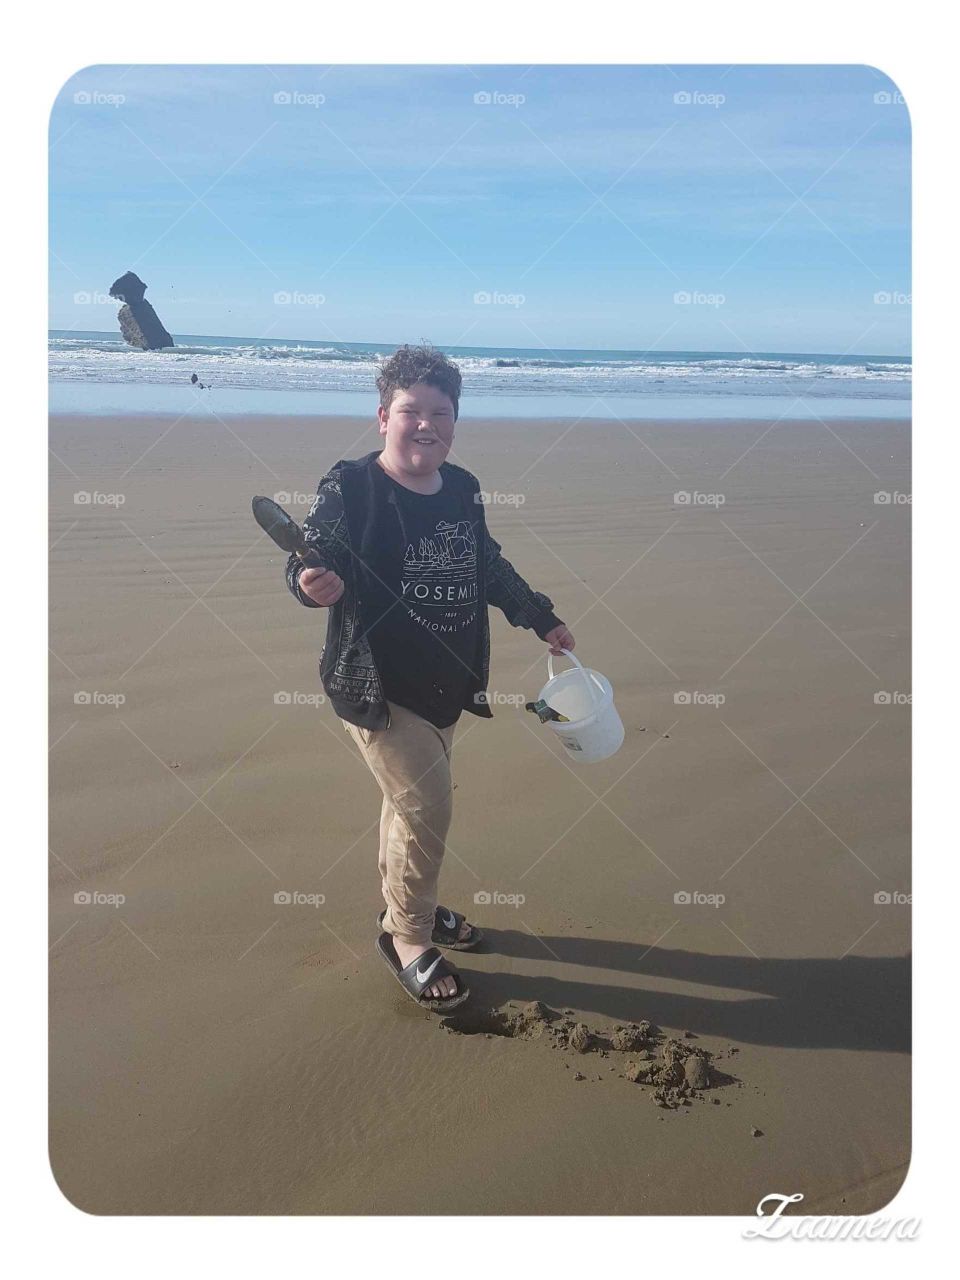 A fun day out on Parangahau beach NZ. My son flips sand into the air with his little sand shovel. I capture the moment.